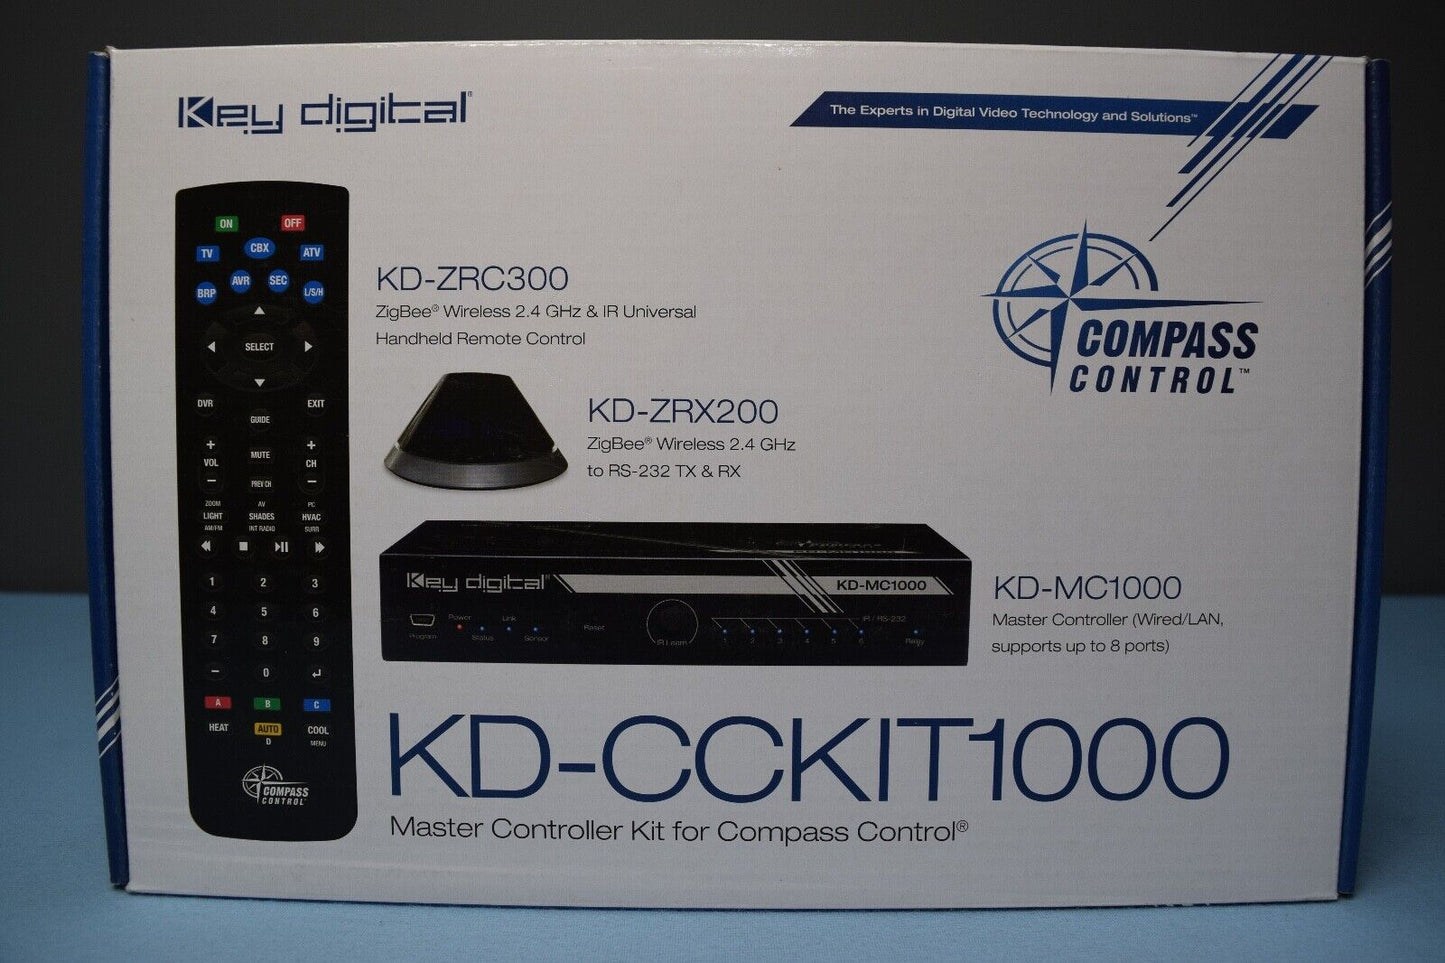 KEY DIGITAL KD-CCKIT 1000 MASTER CONTROLLER KIT FOR COMPASS CONTROL